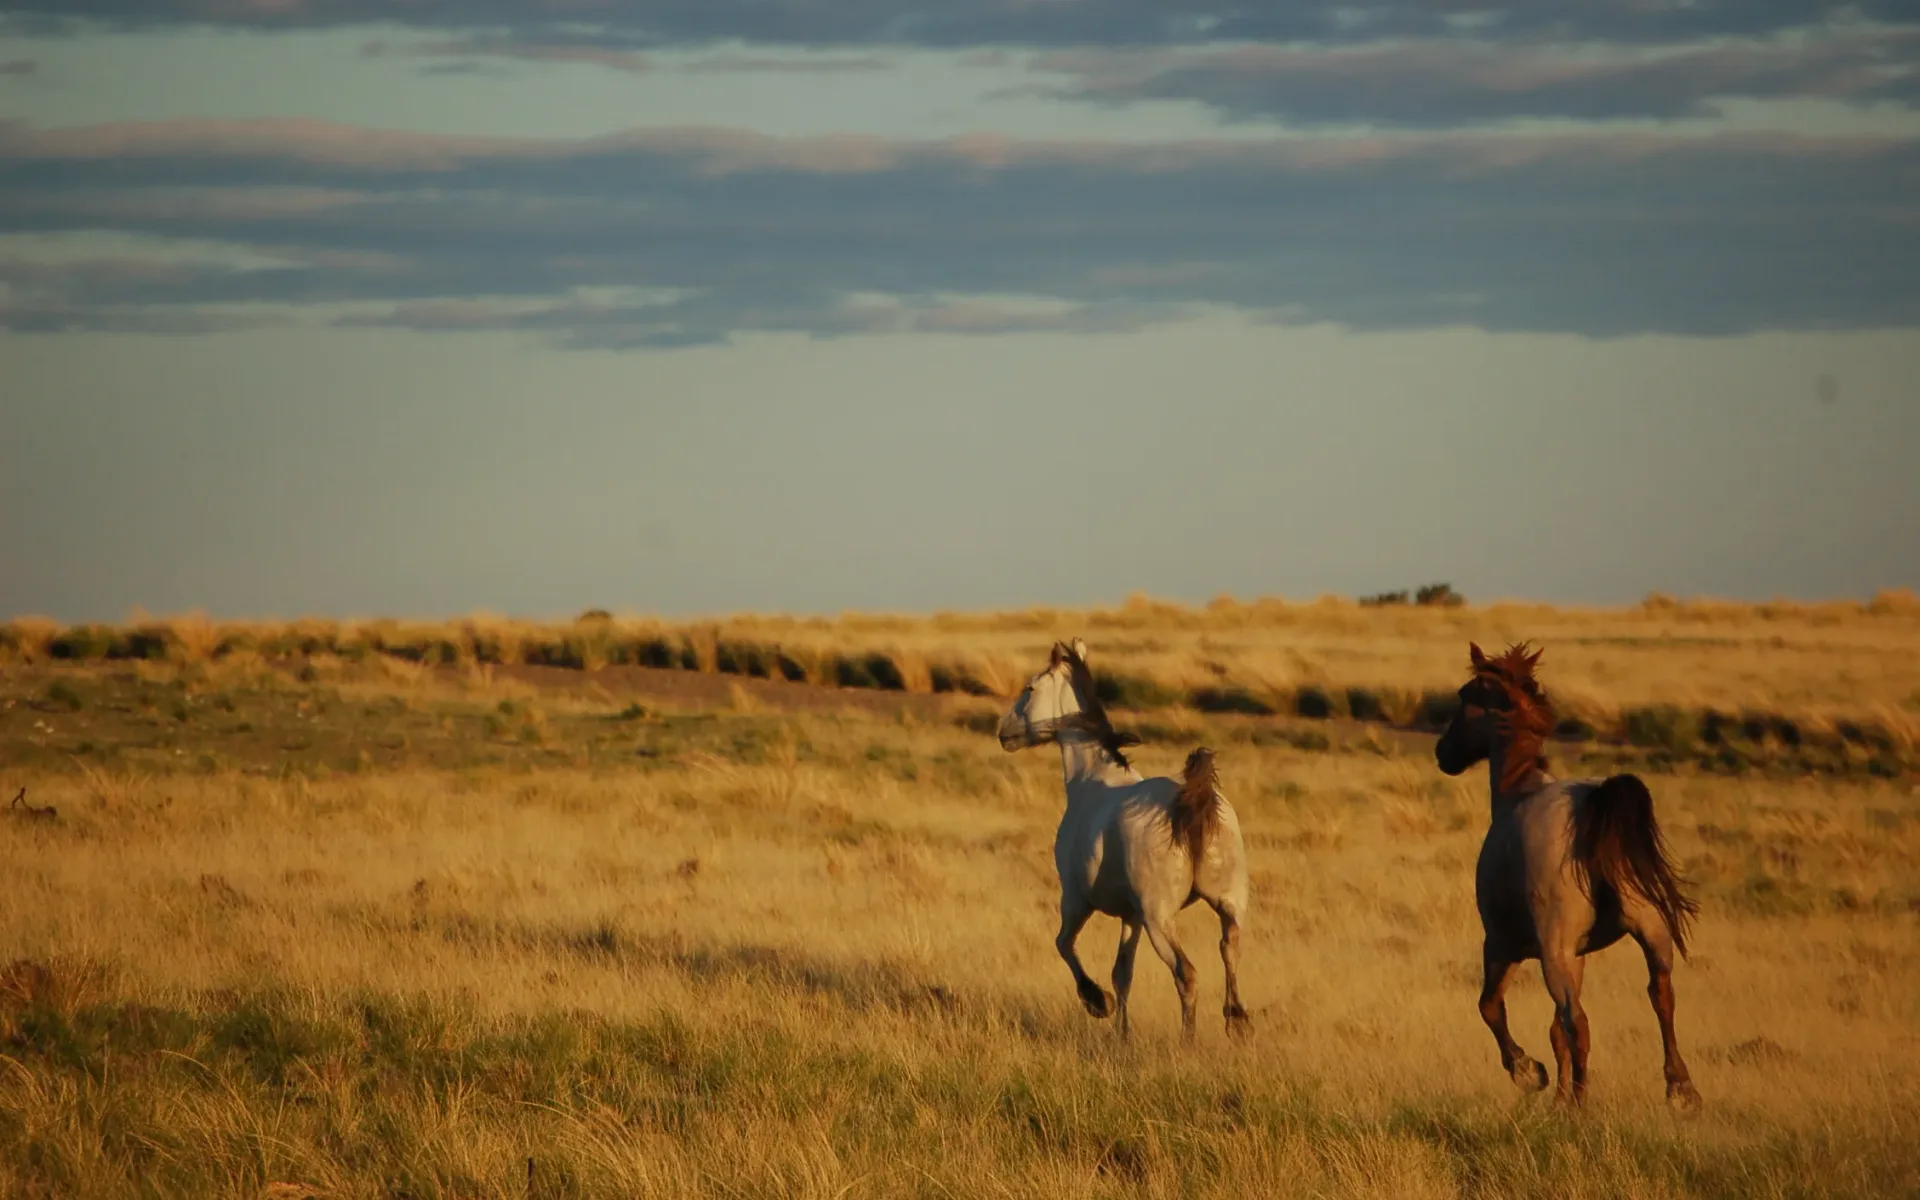 Two horses gallop across the nearby grasslands during the late afternoon.